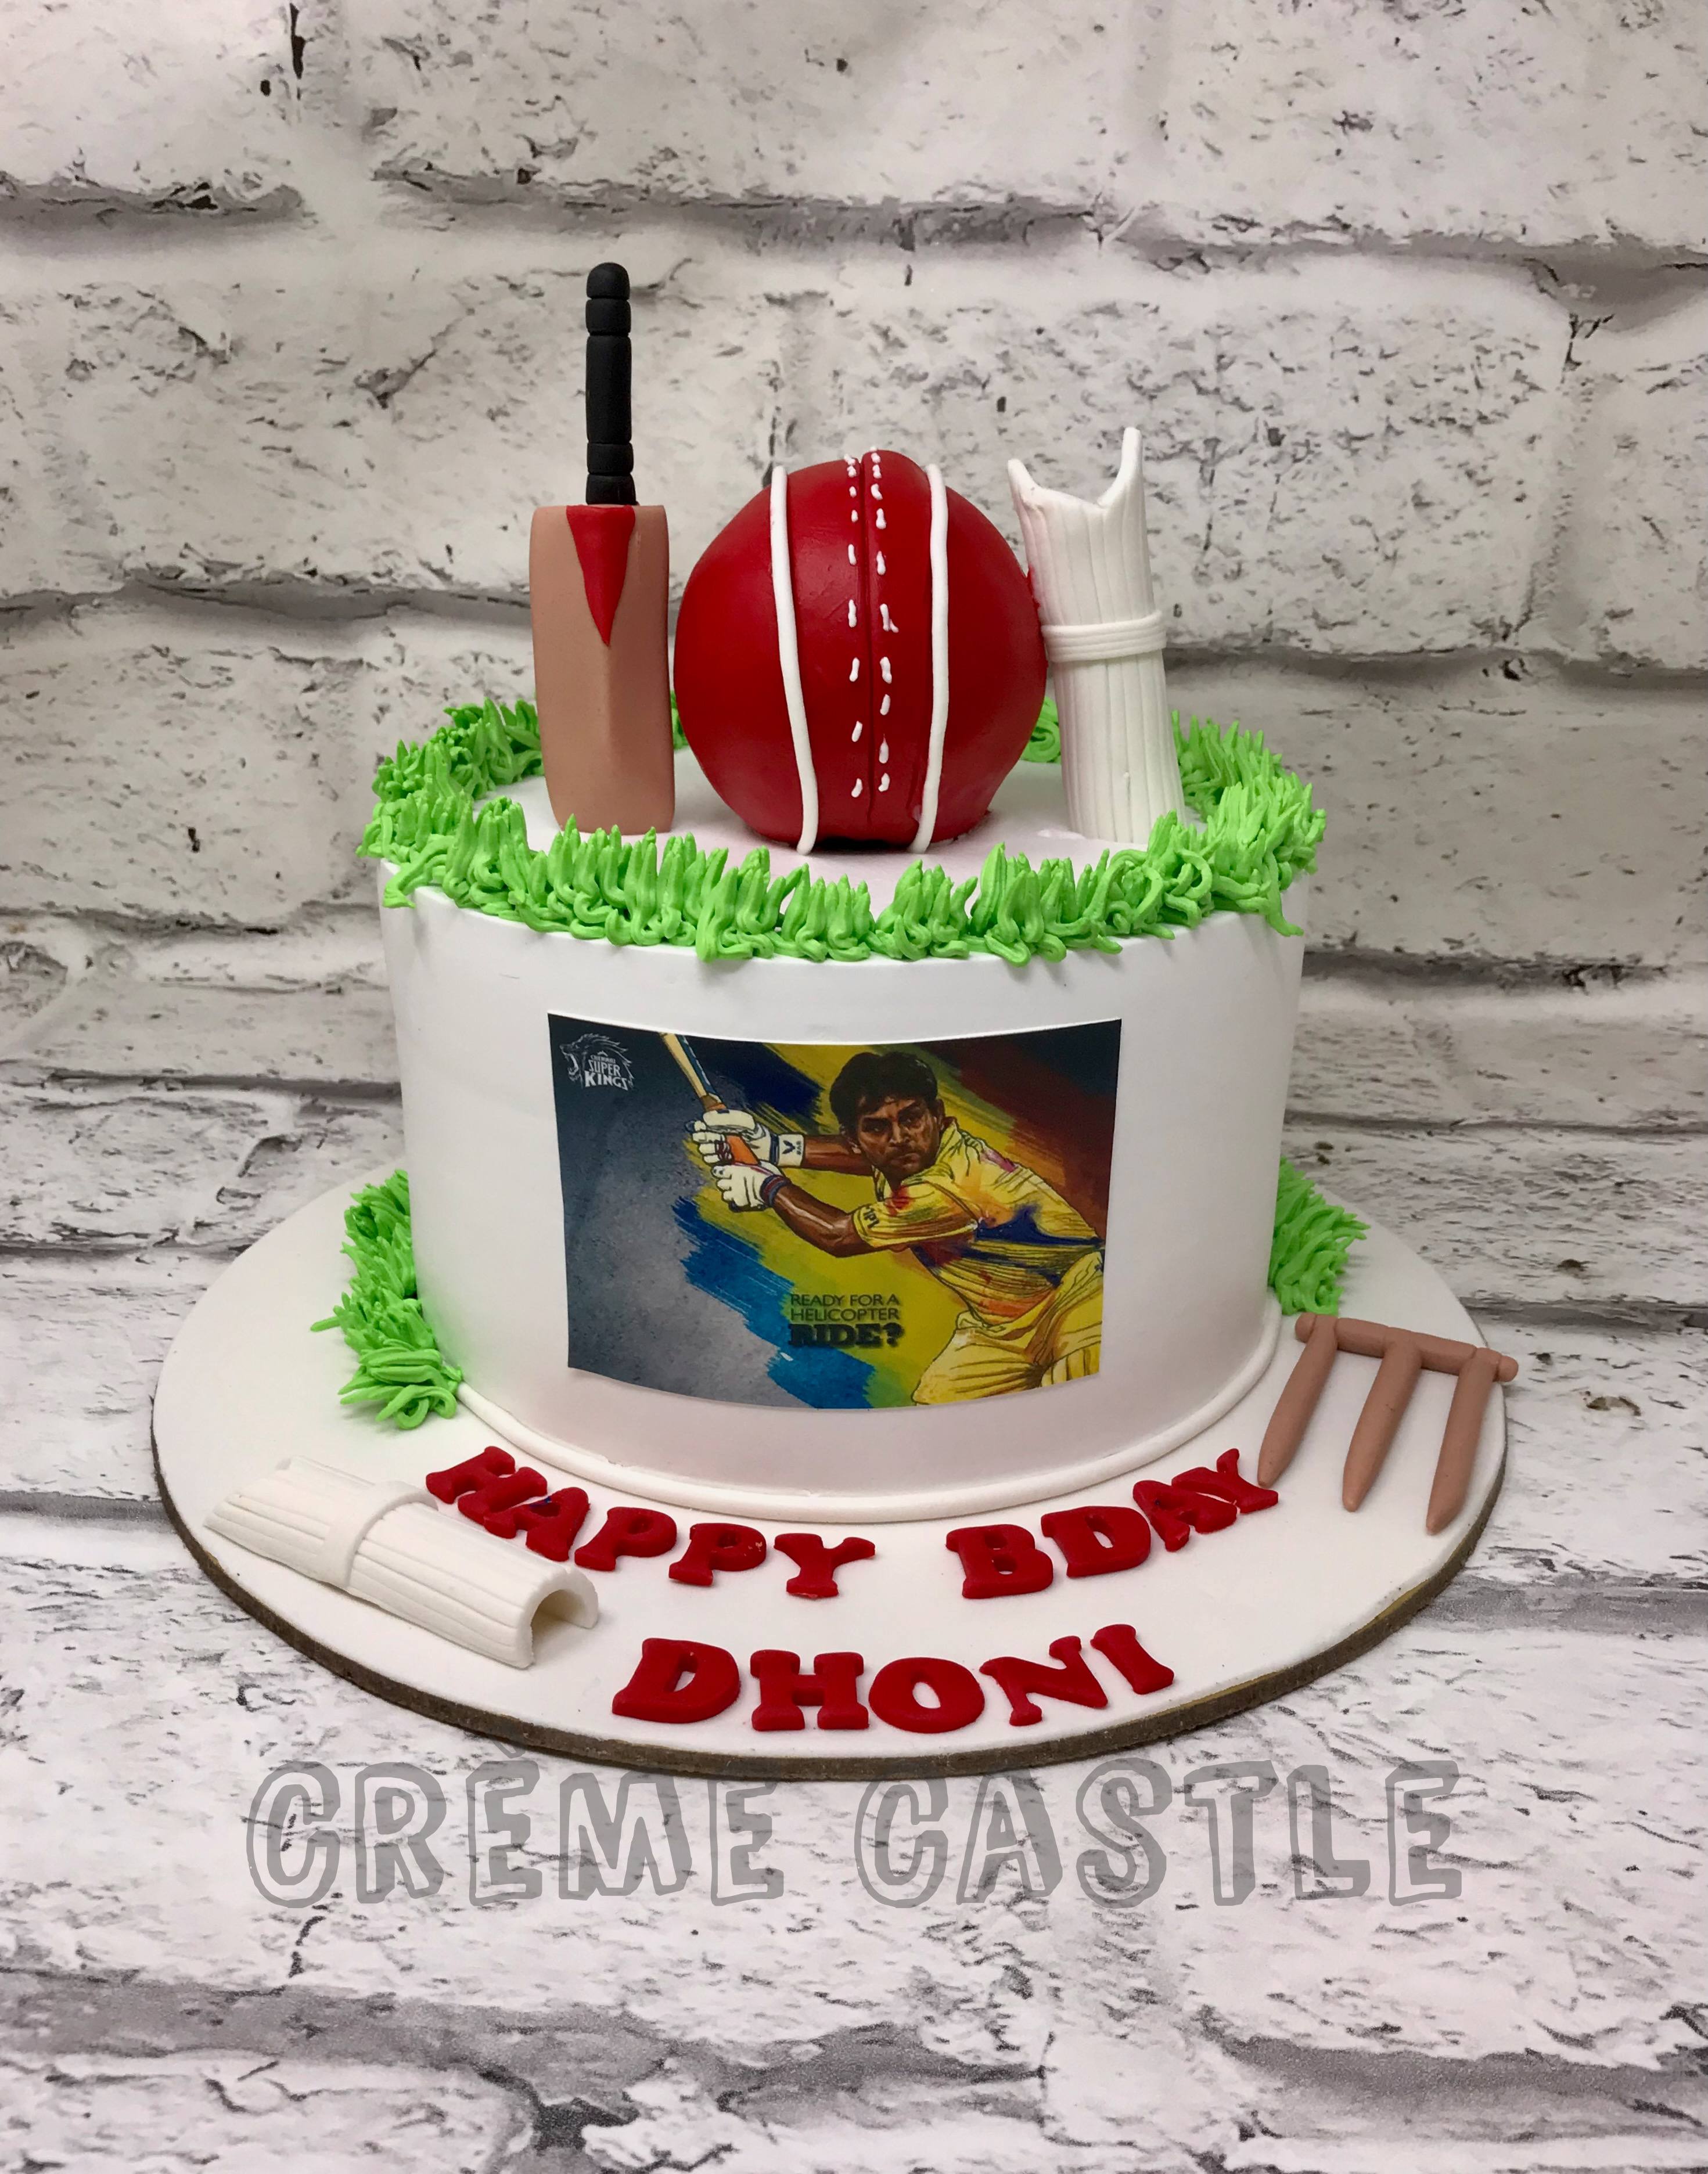 Buy Personalised Square Cricket Cake Online | Chef Bakers